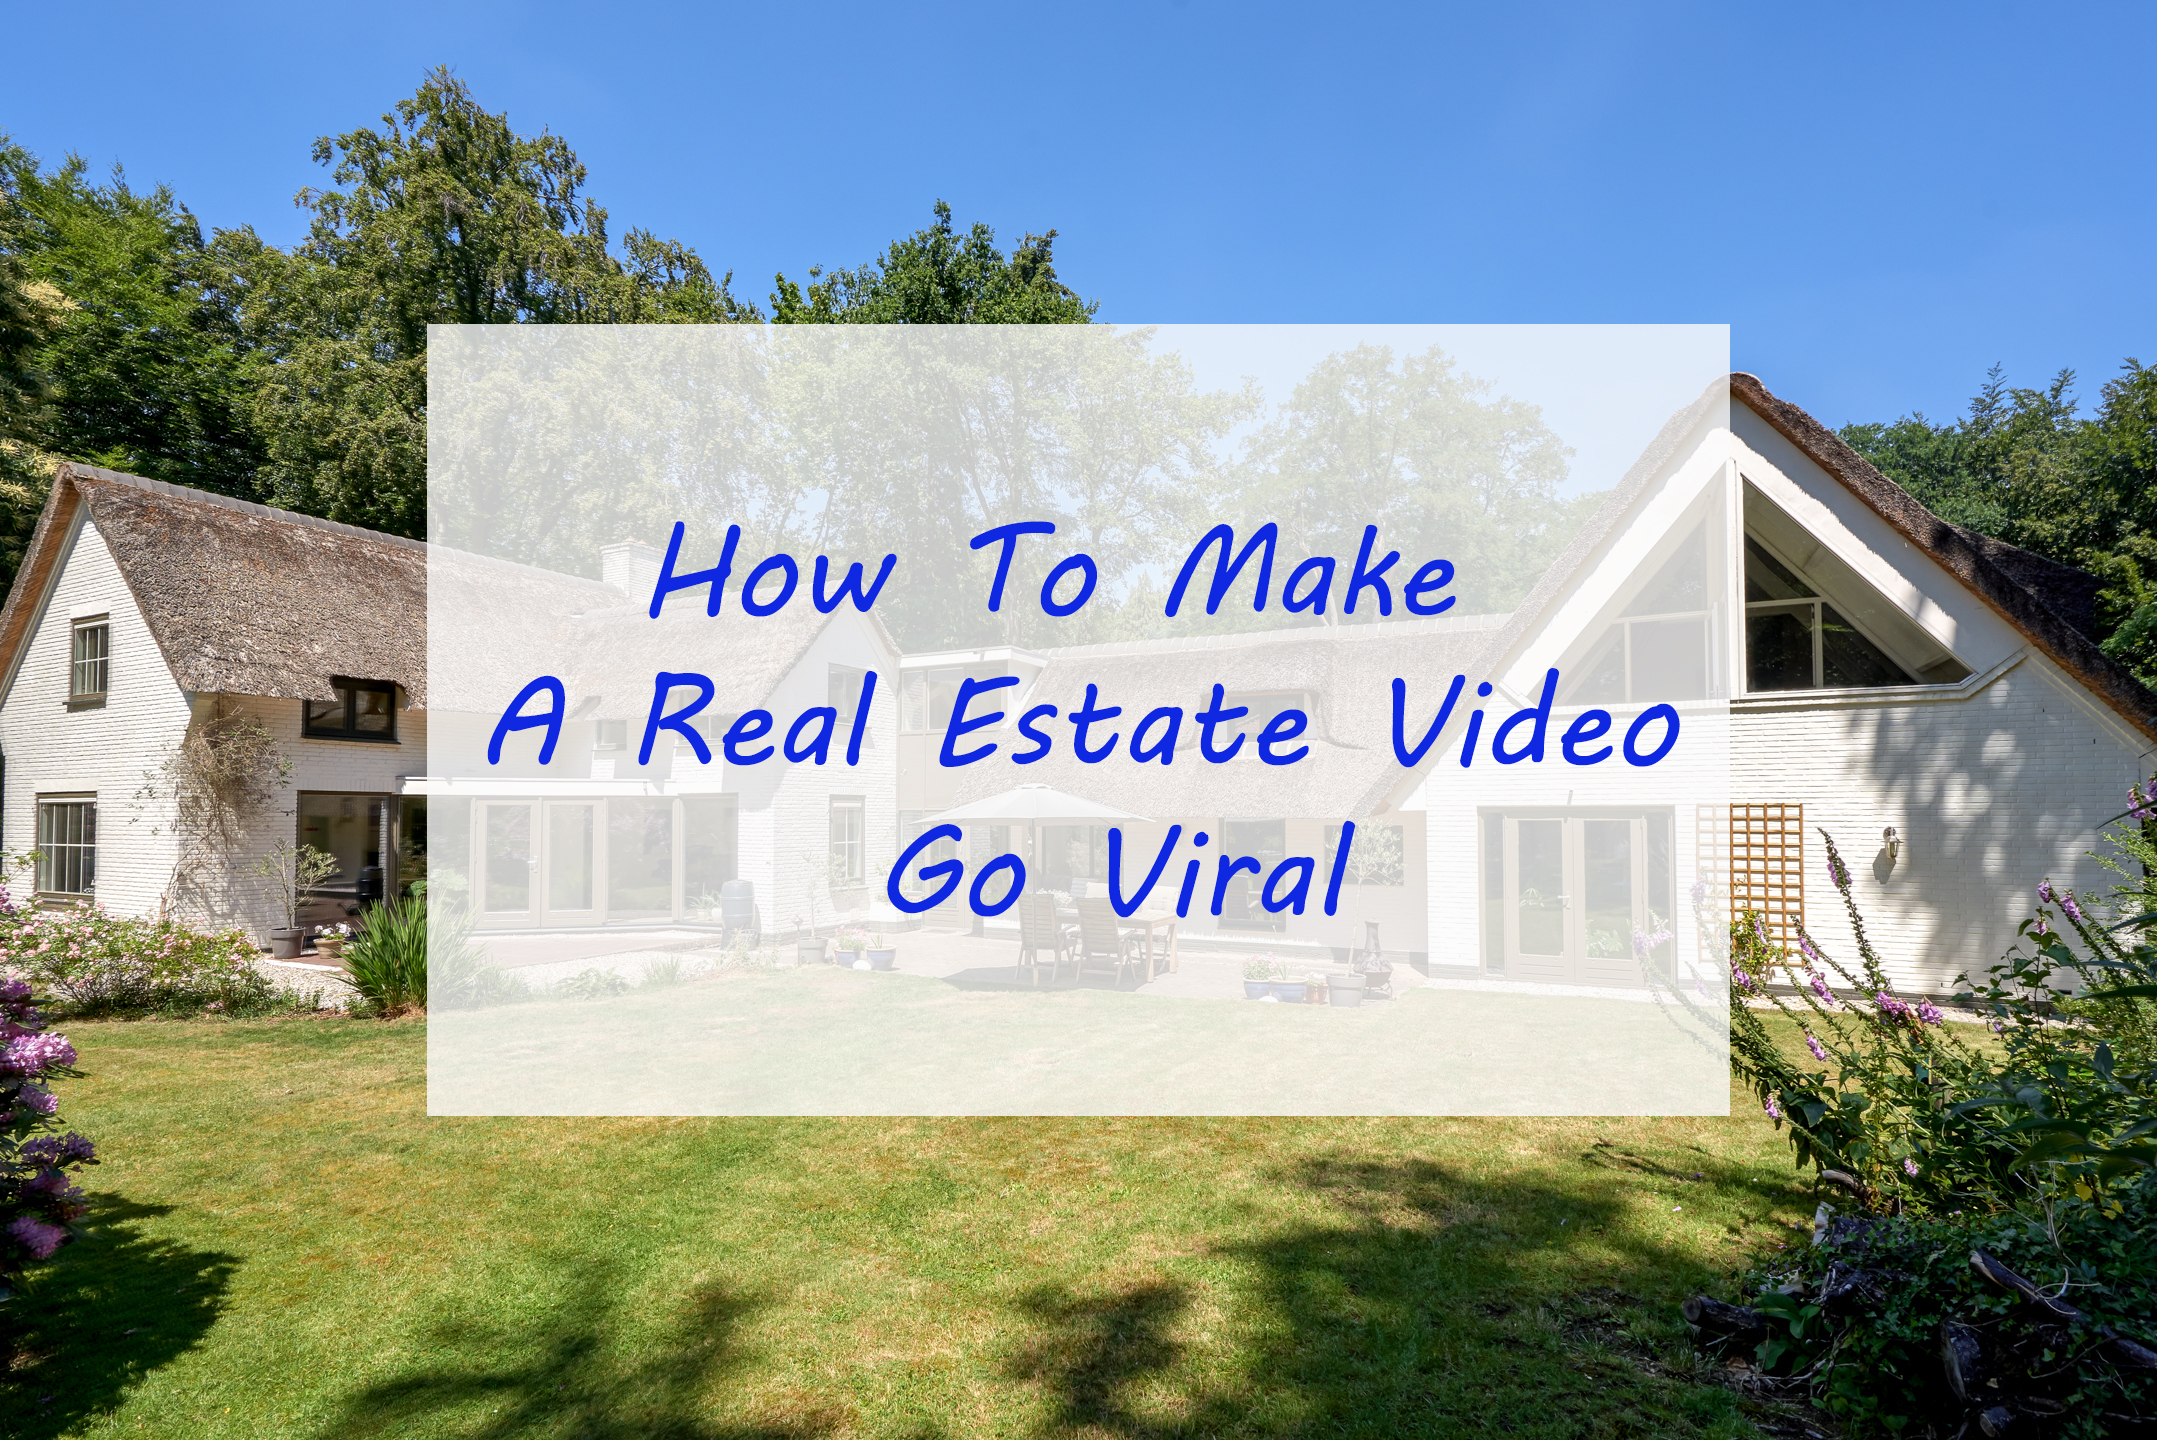 How To Make A Real Estate Video Go Viral